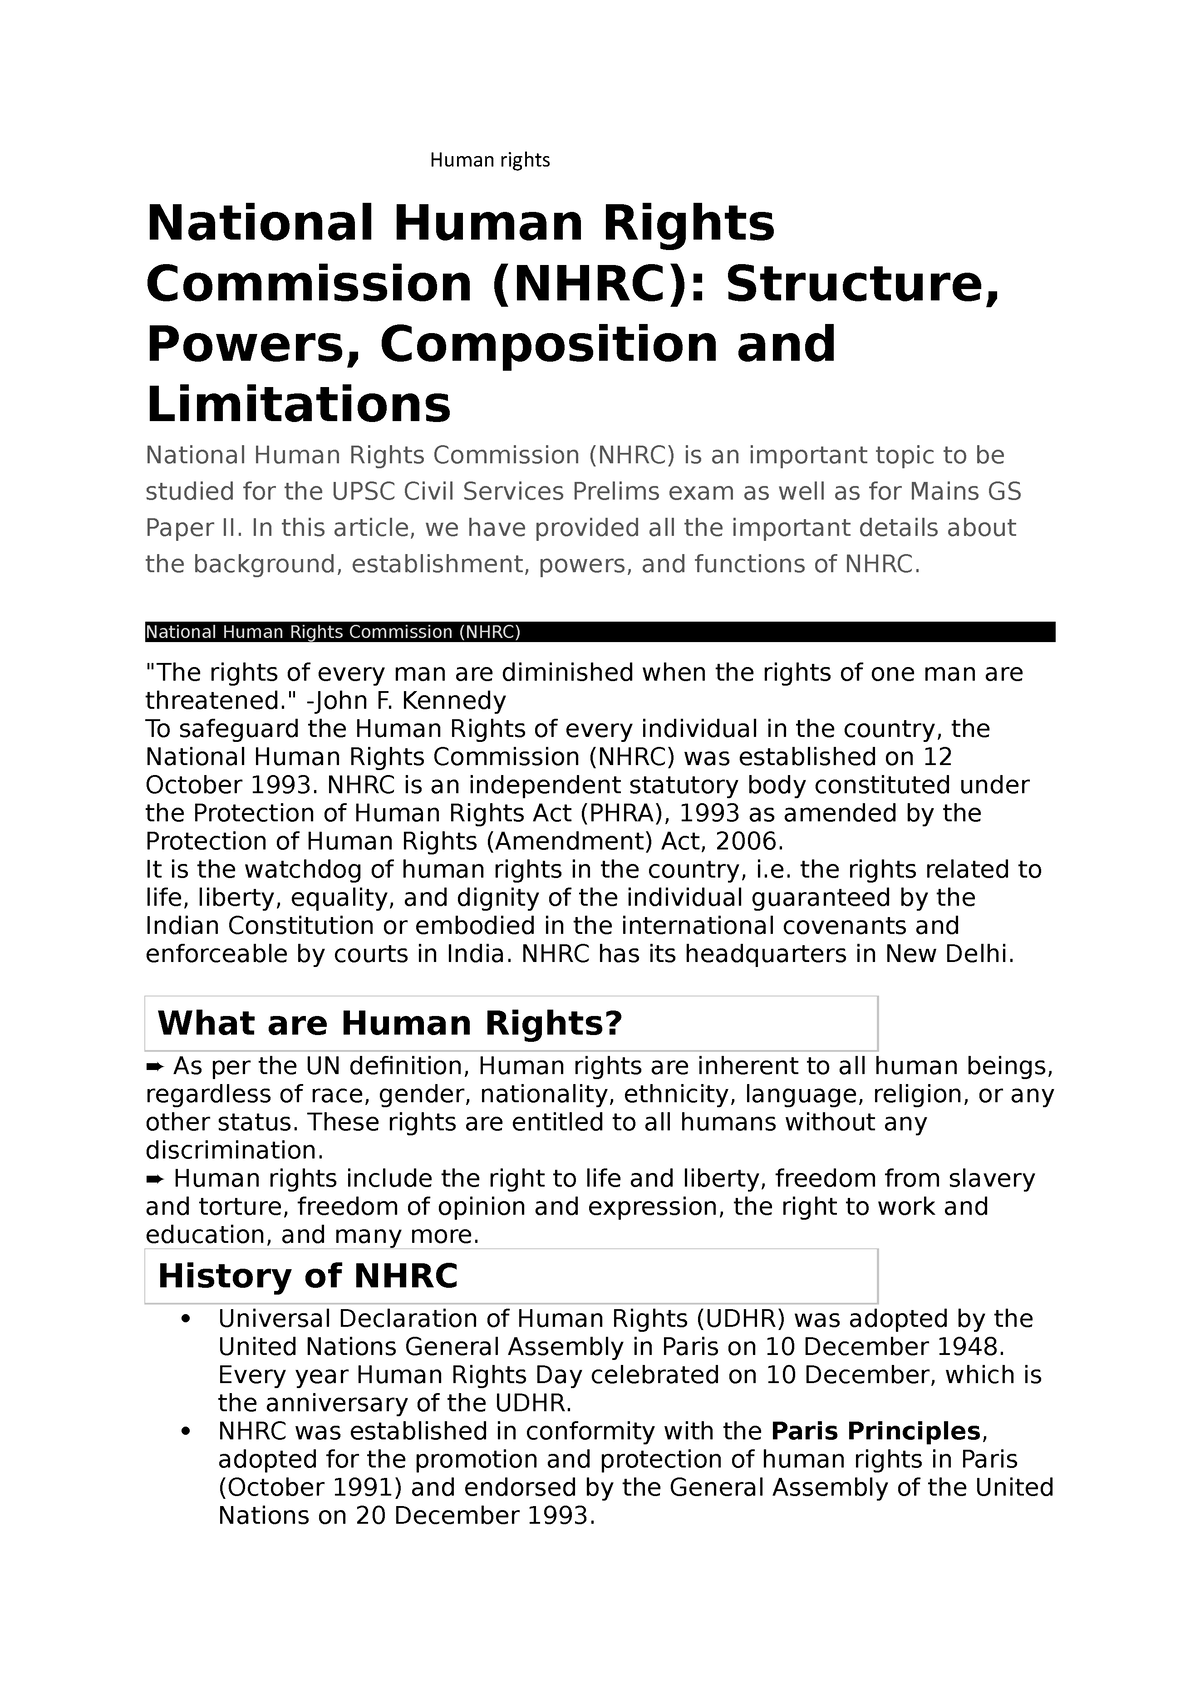 essay on human rights commission